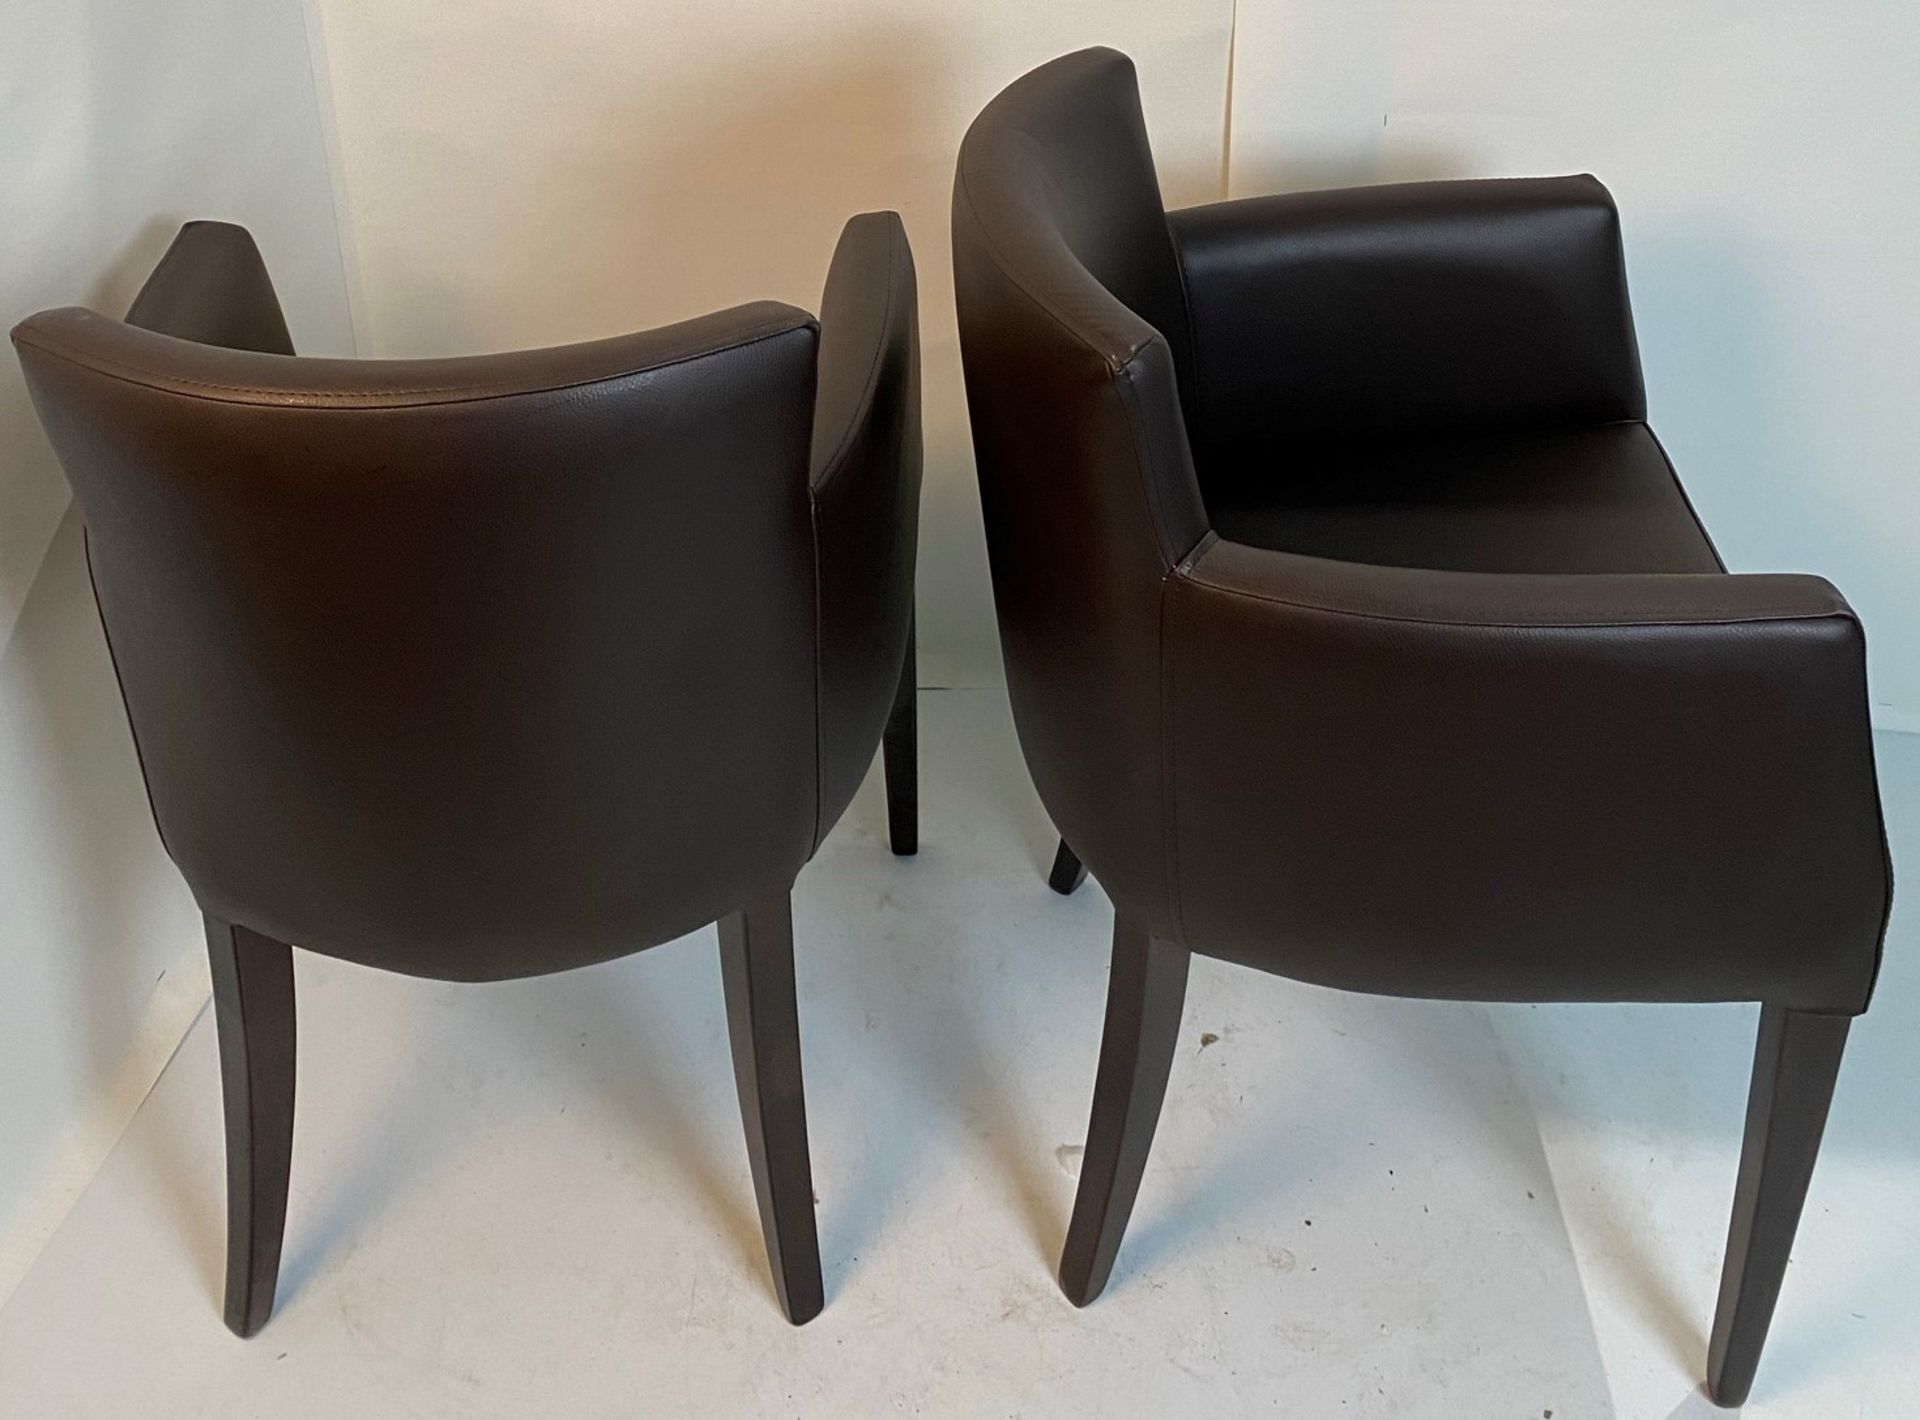 2 x Omega Vena BR-5 Dark Brown armchairs with walnut coloured frames - Image 4 of 6